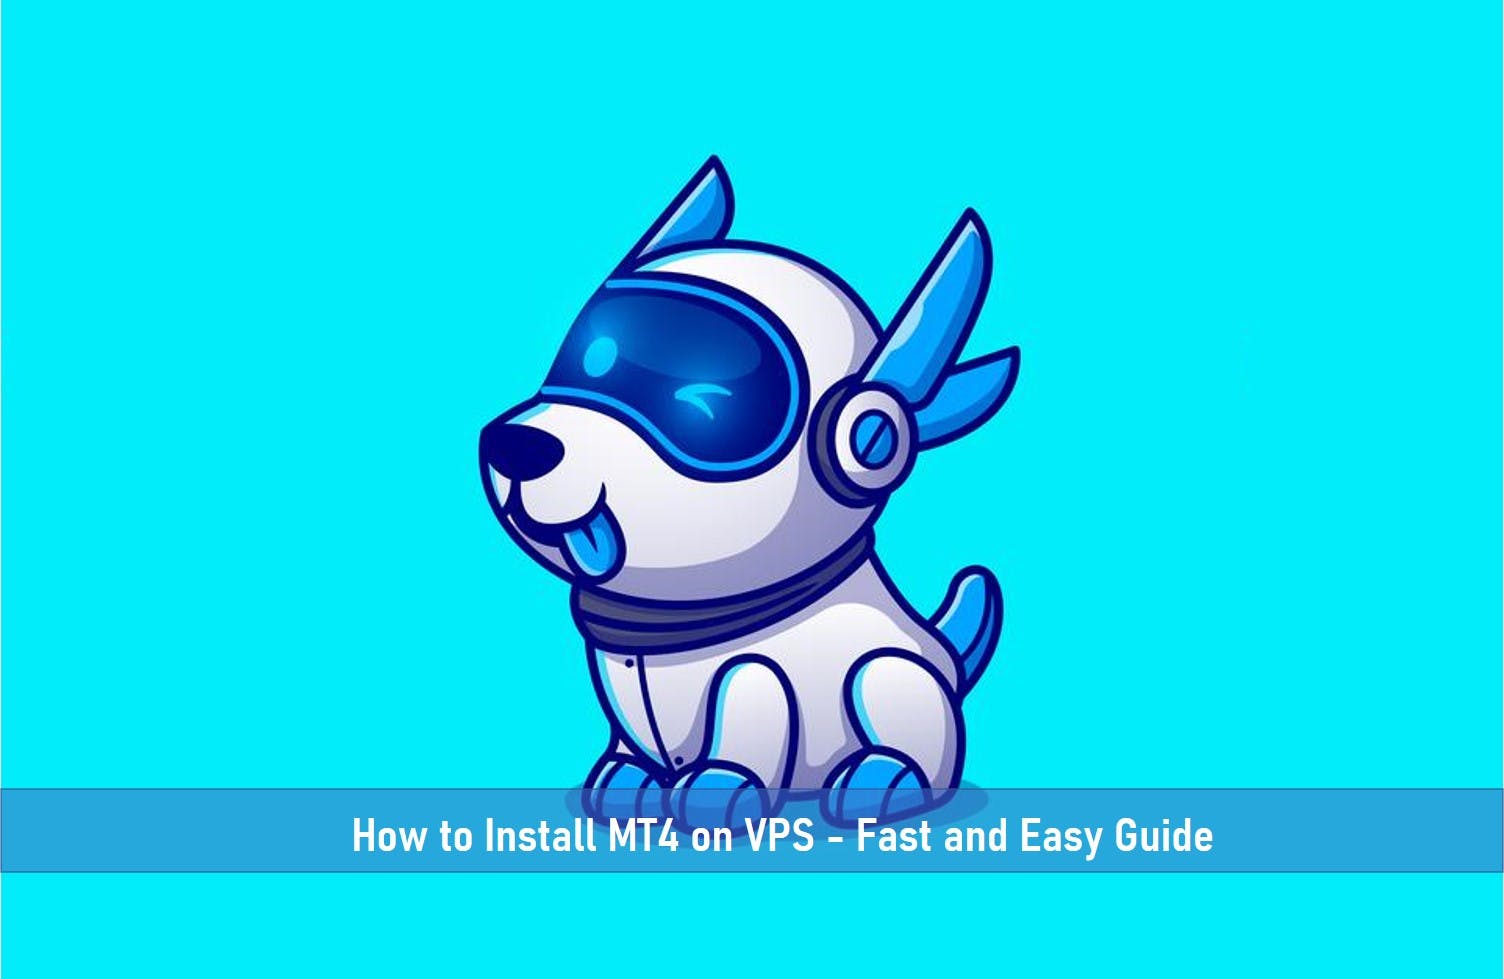 How to Install MT4 on VPS – Fast and Easy Guide